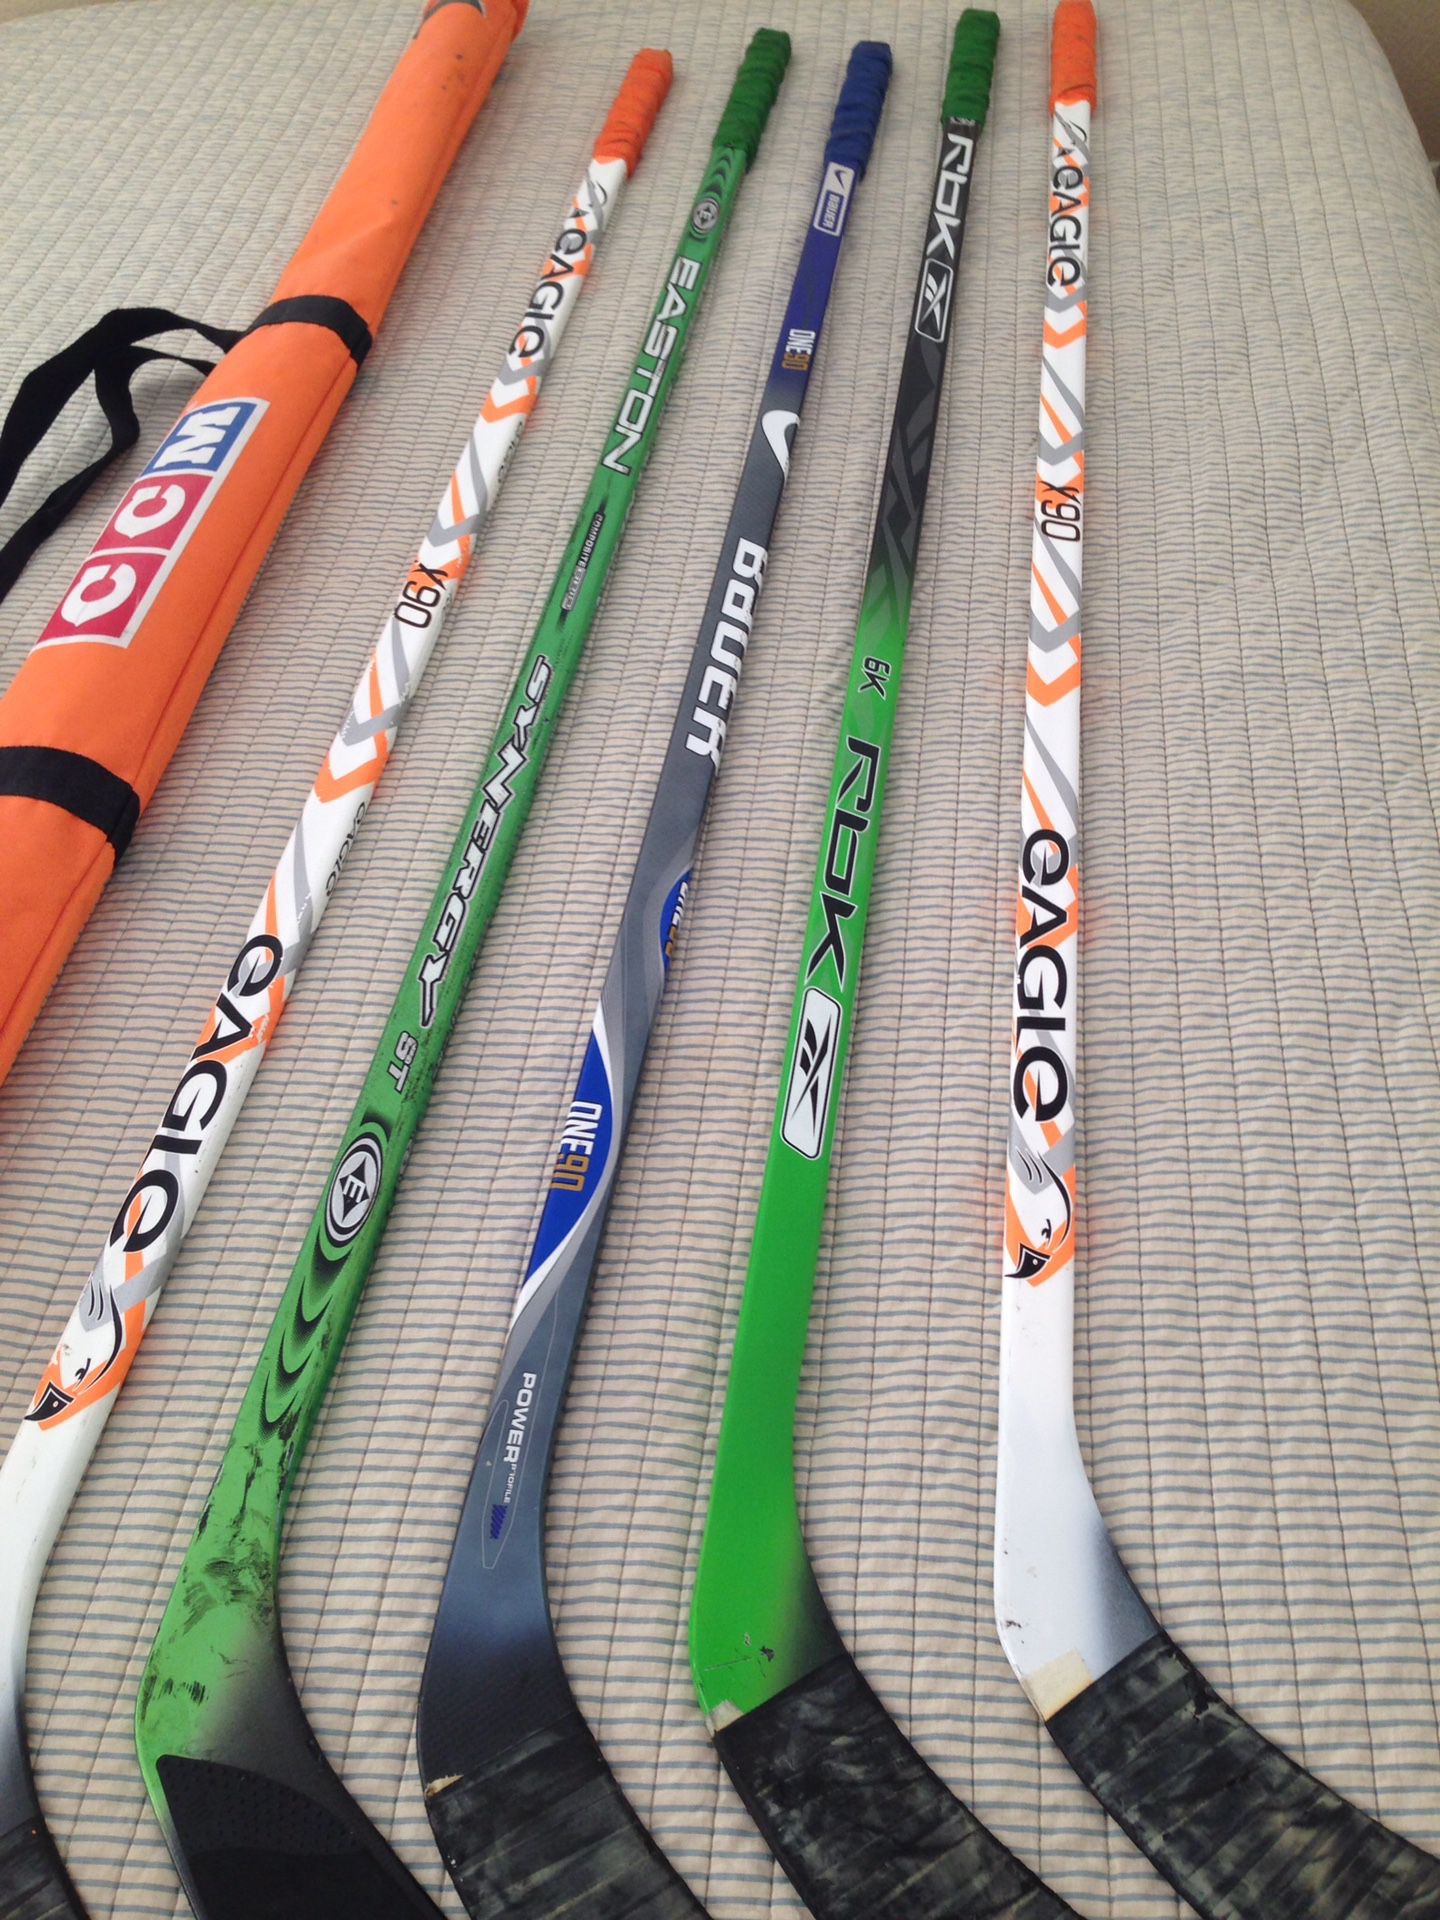 Hockey sticks new and used. Left handed. Reebok, Easton, other